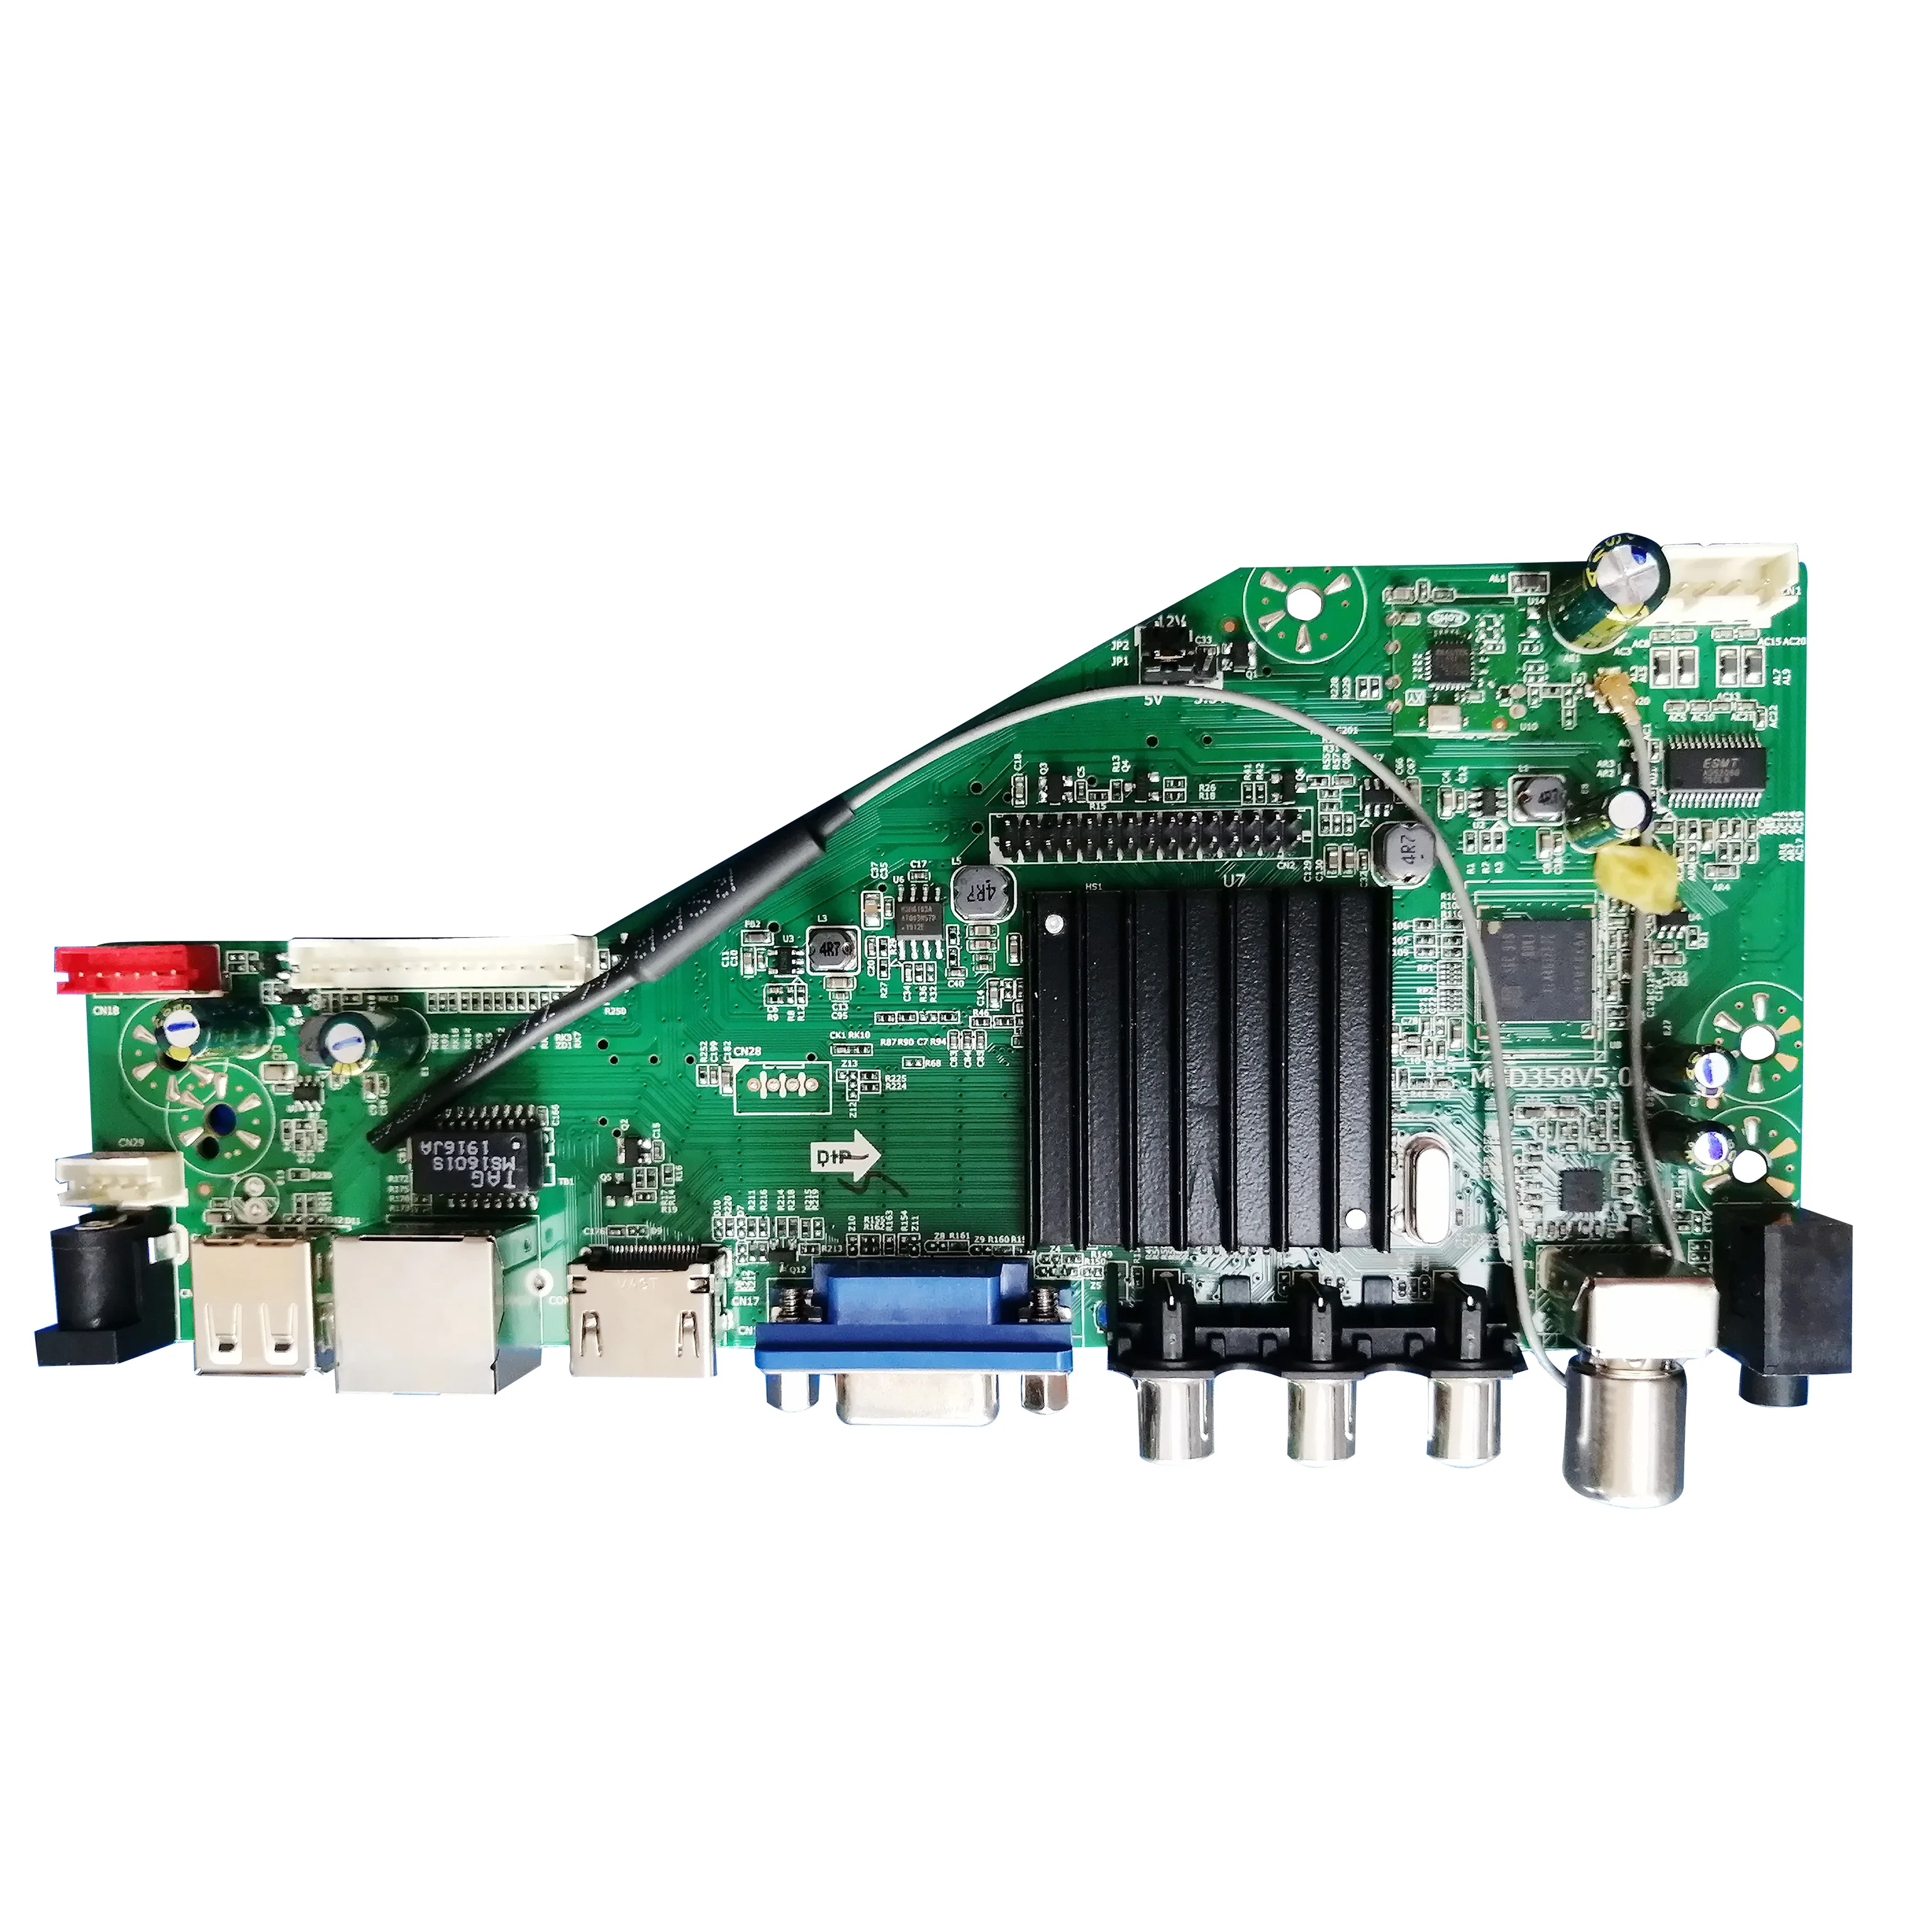 MSD358V5.0 Android 8.0 1G+4G 4 Cores Intelligent Wireless Network TV Driver Board Universal LCD Motherboard WI-FI 3.3/5/12V